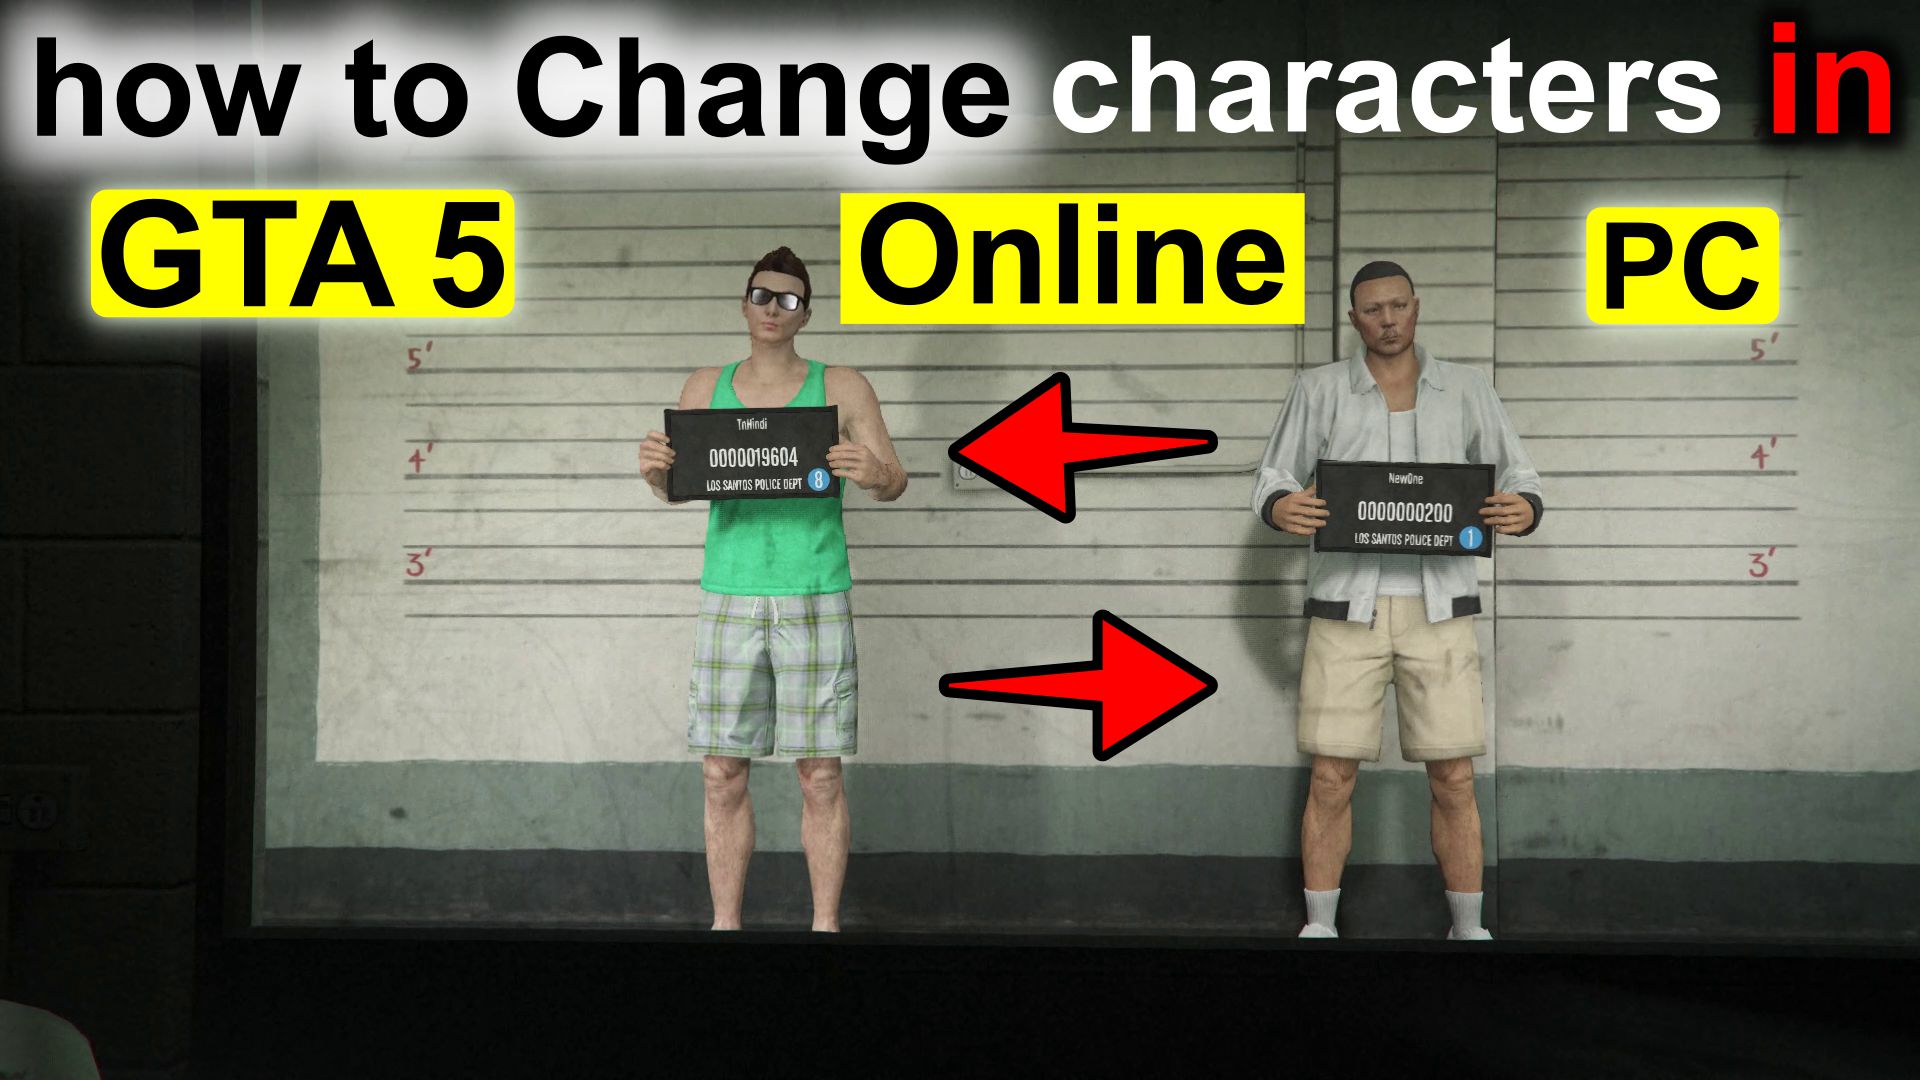 how to change characters in GTA 5 online PC